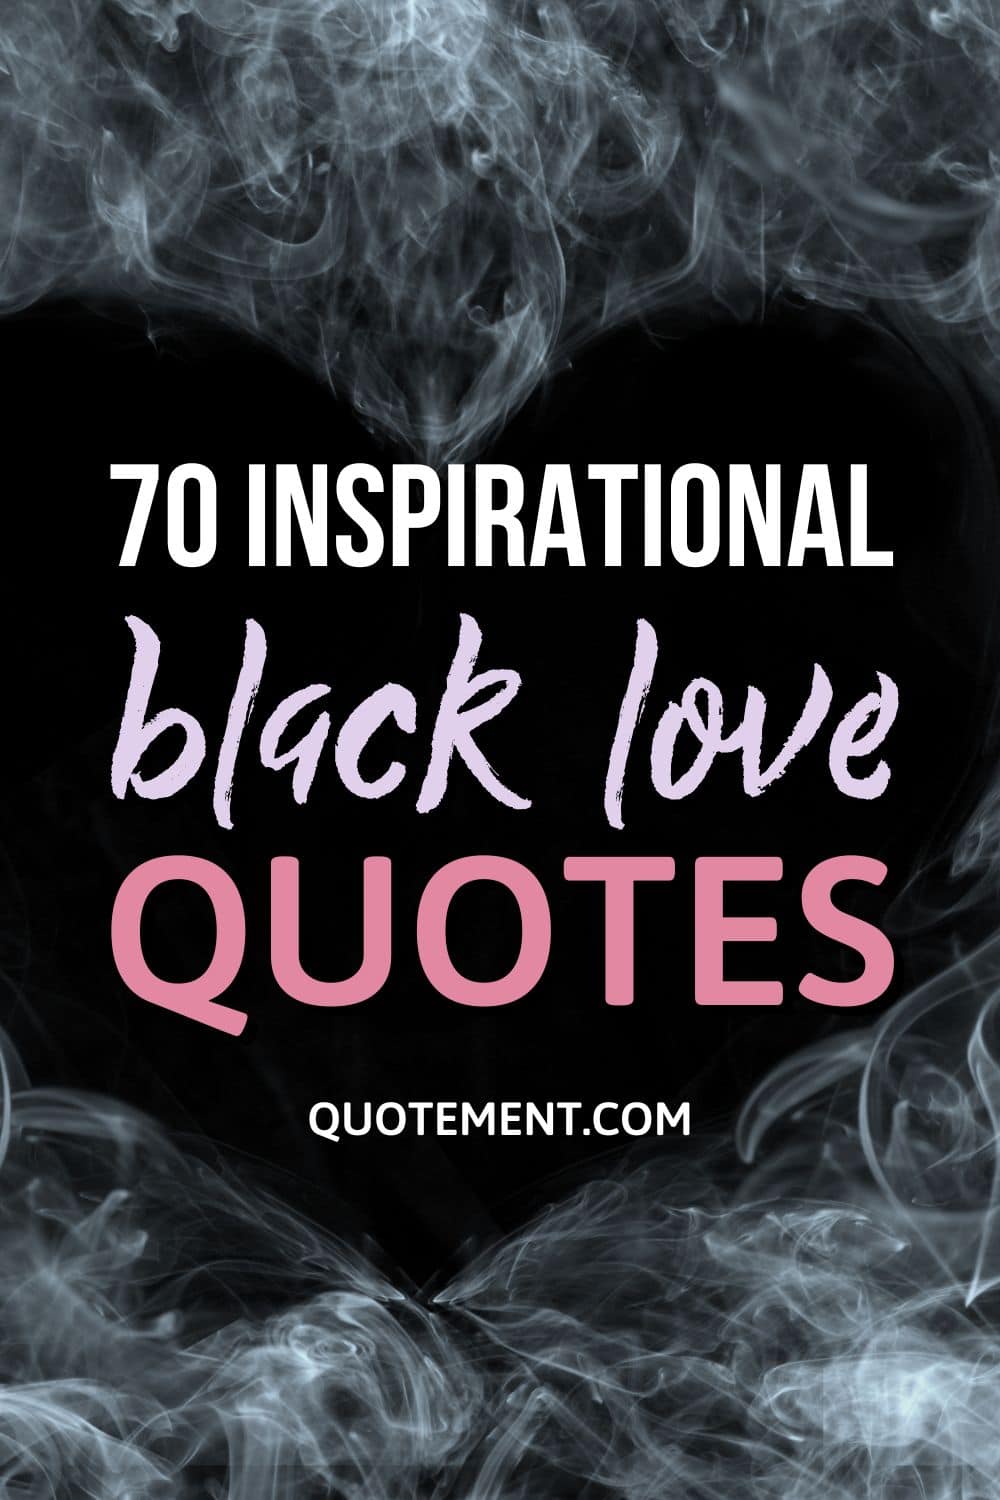 70 Ultimate Black Love Quotes To Inspire & Motivate You